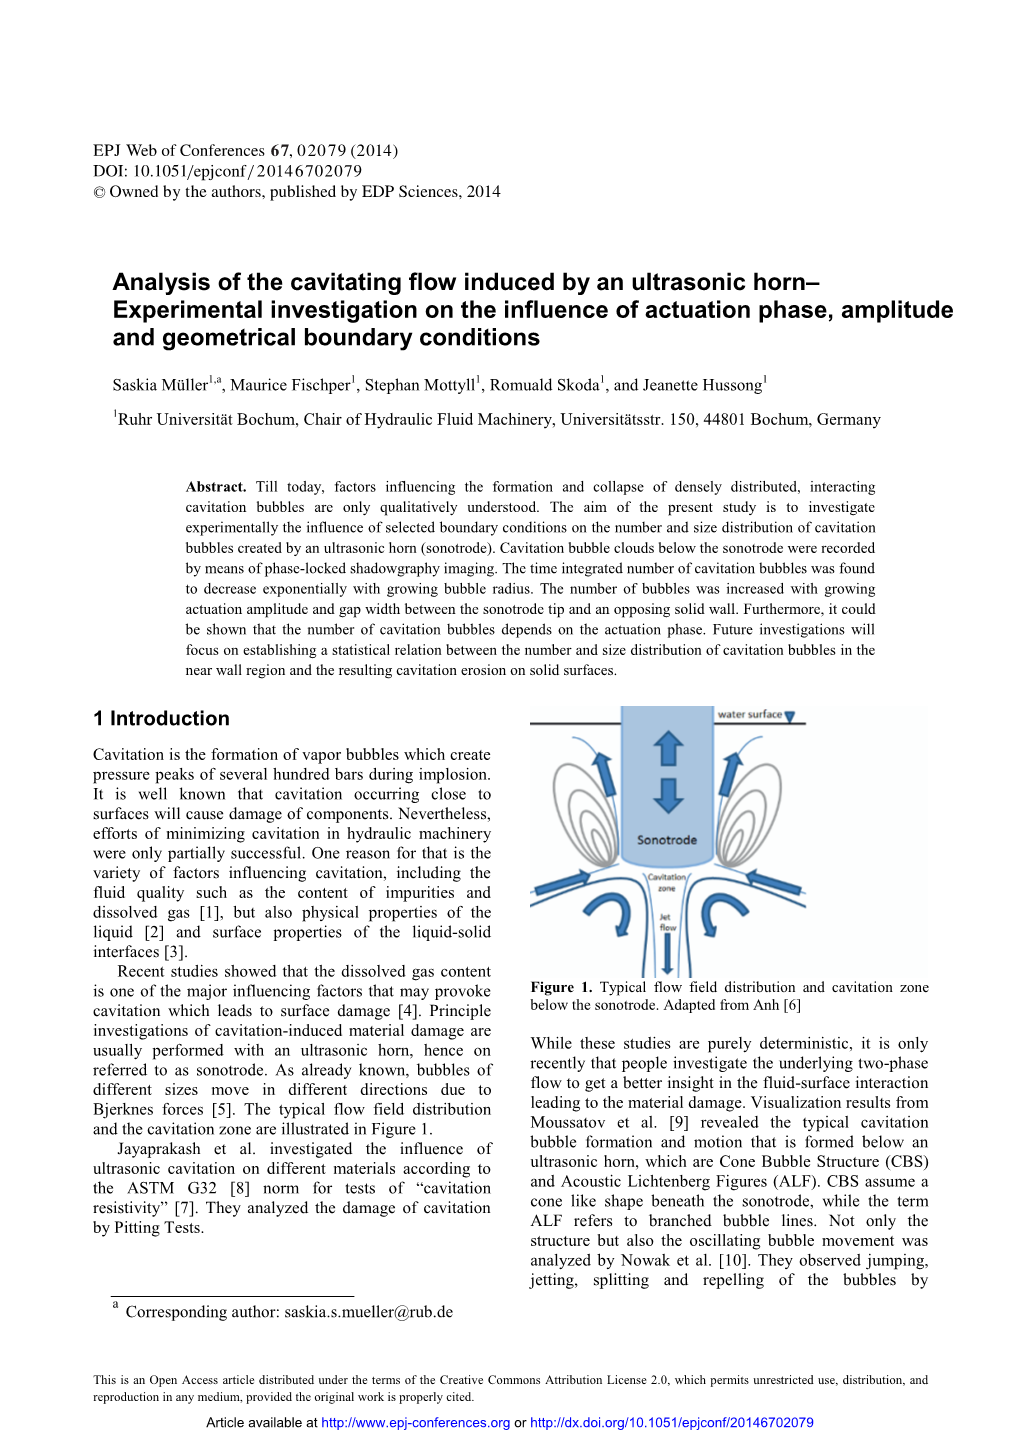 Analysis of the Cavitating Flow Induced by an Ultrasonic Horn